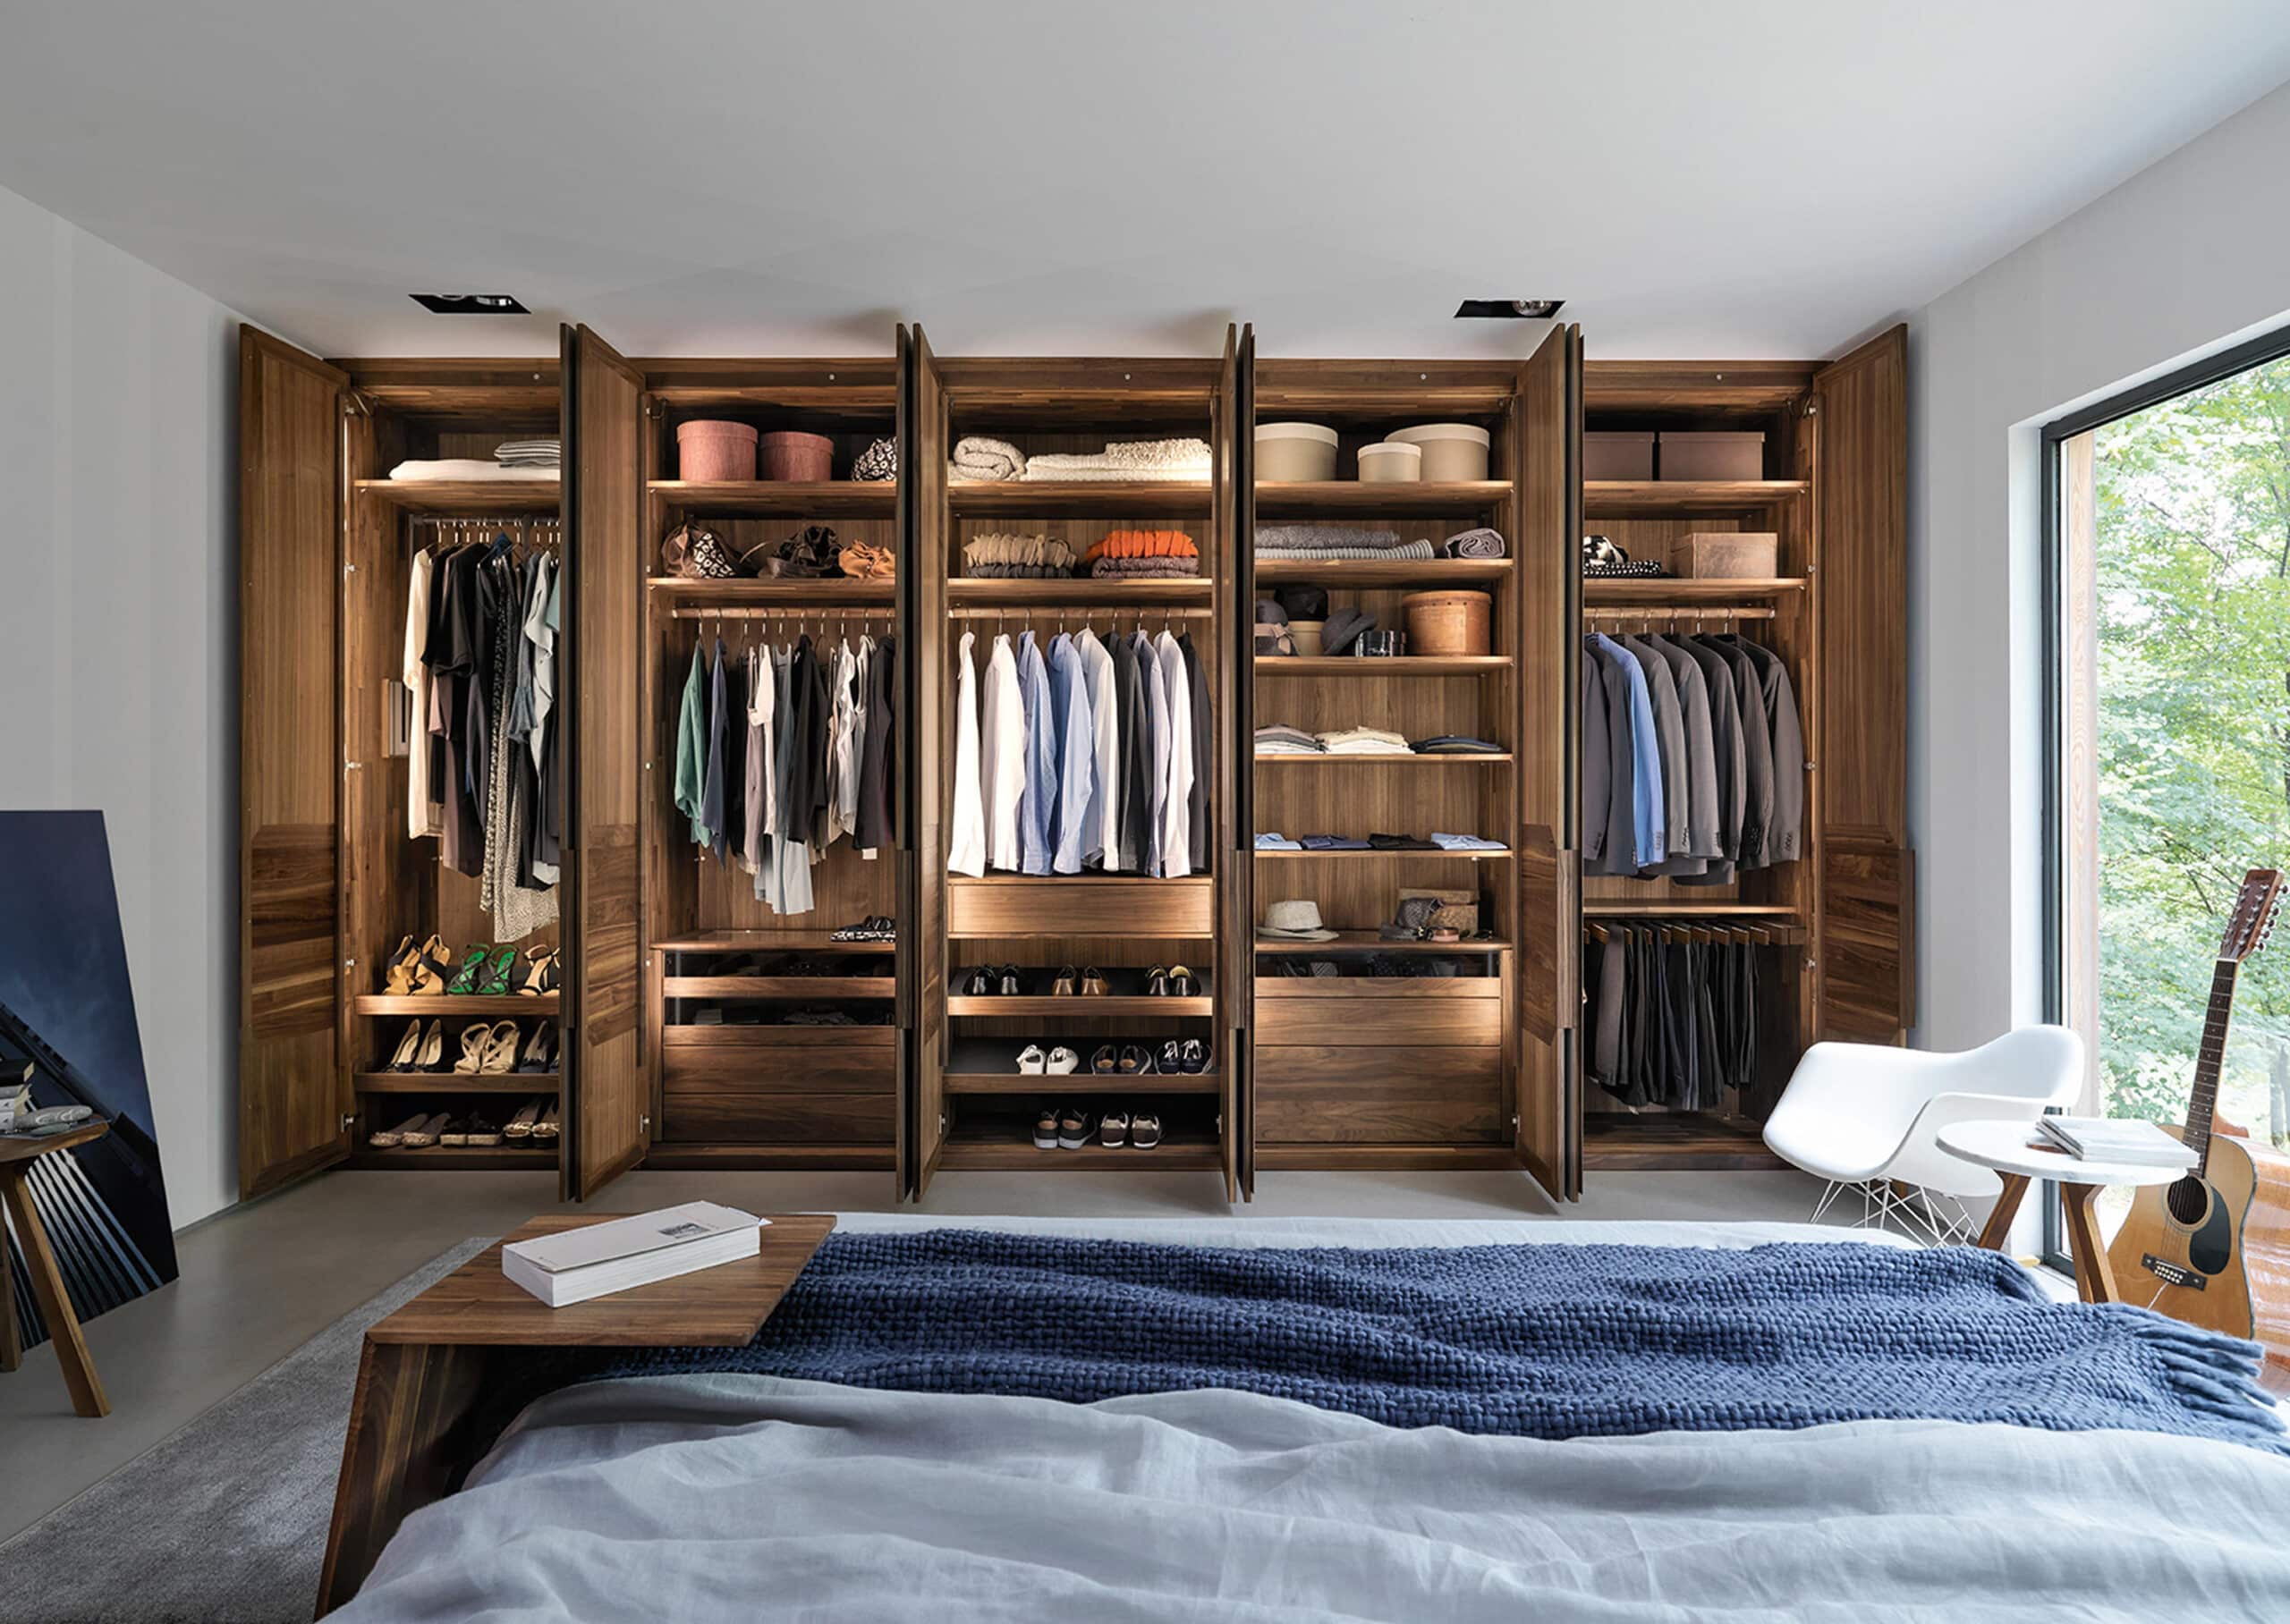 What To Do With Old Wardrobes 